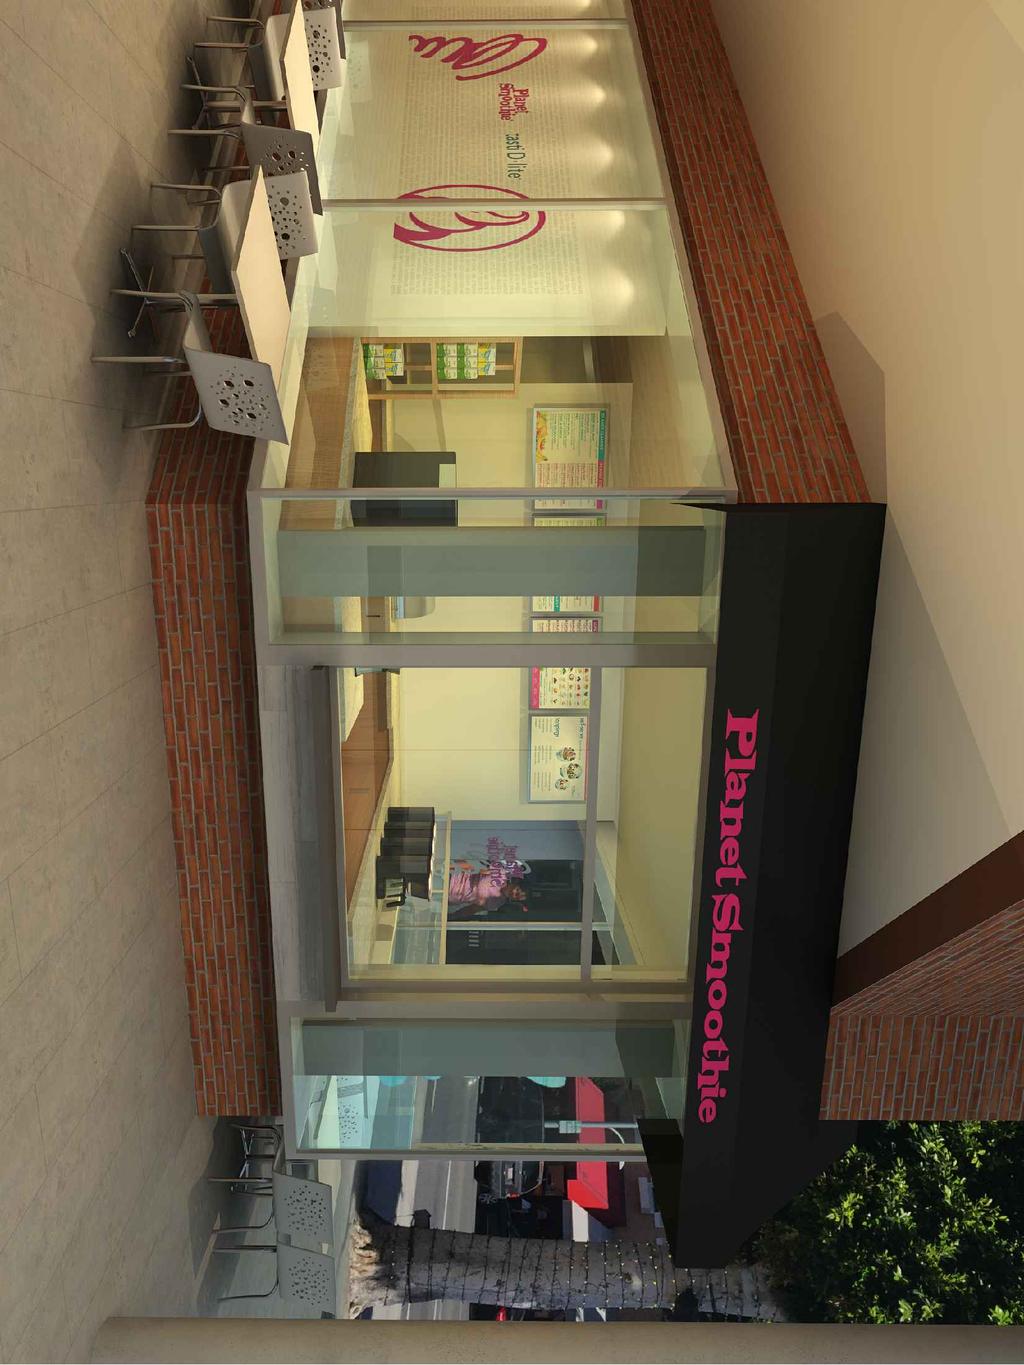 5 S BEVERLY DRIVE PLANET SMOOTHIE OFFICES: LA / ORANGE COUNTY